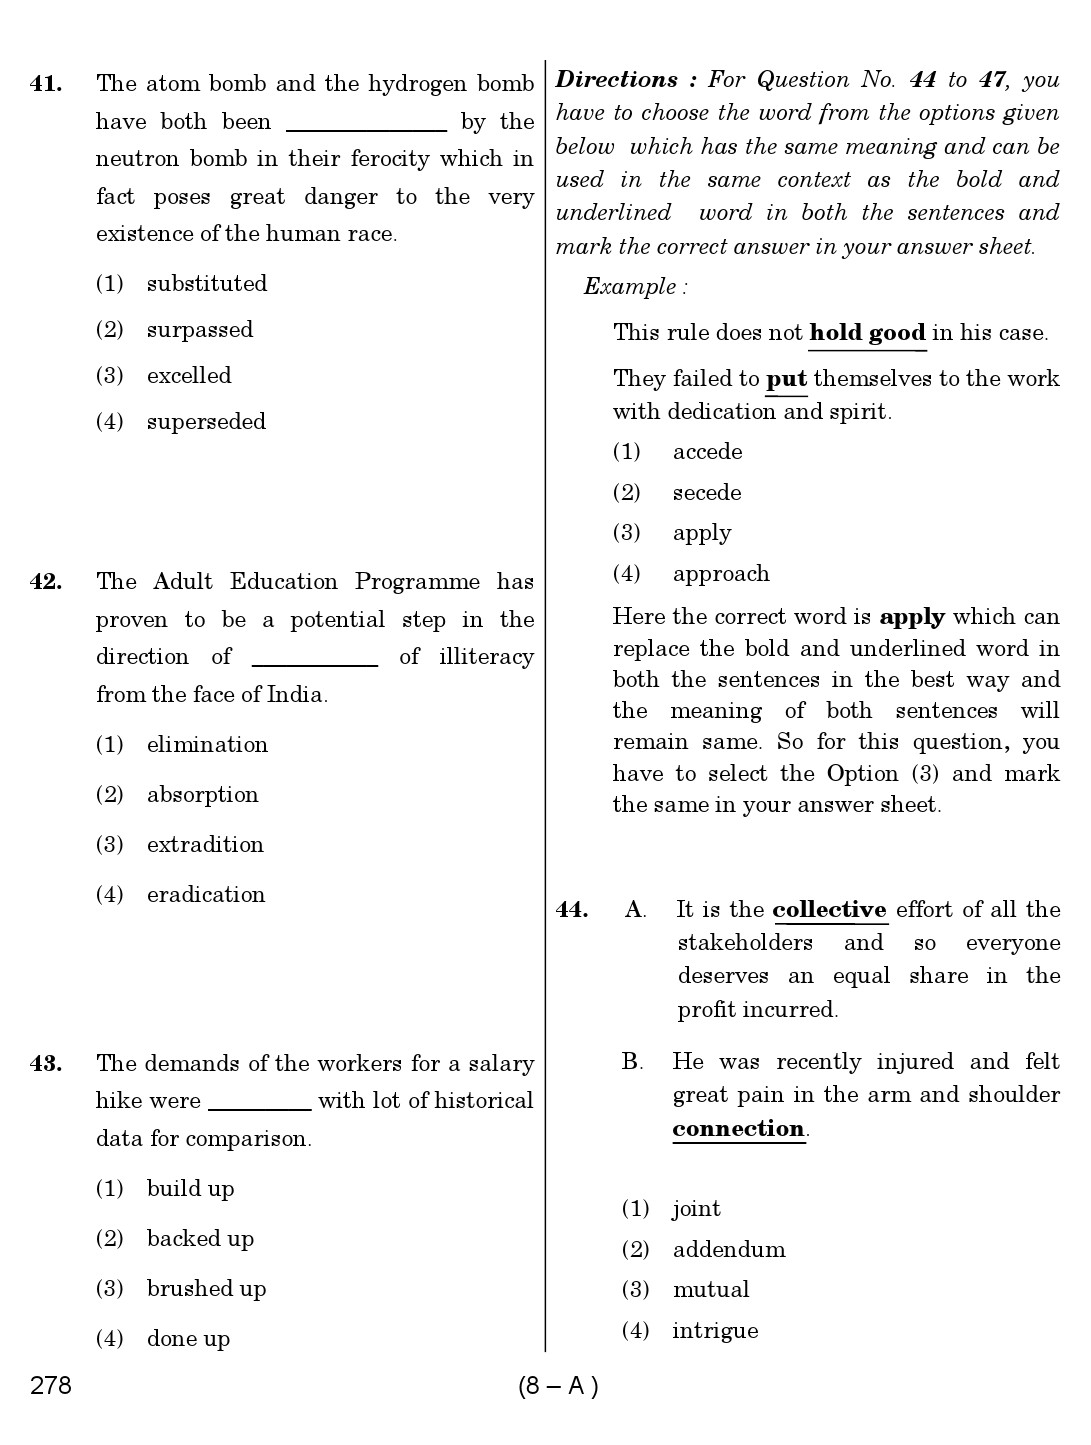 Karnataka PSC First Division Computer Assistants Exam Sample Question Paper 278 8